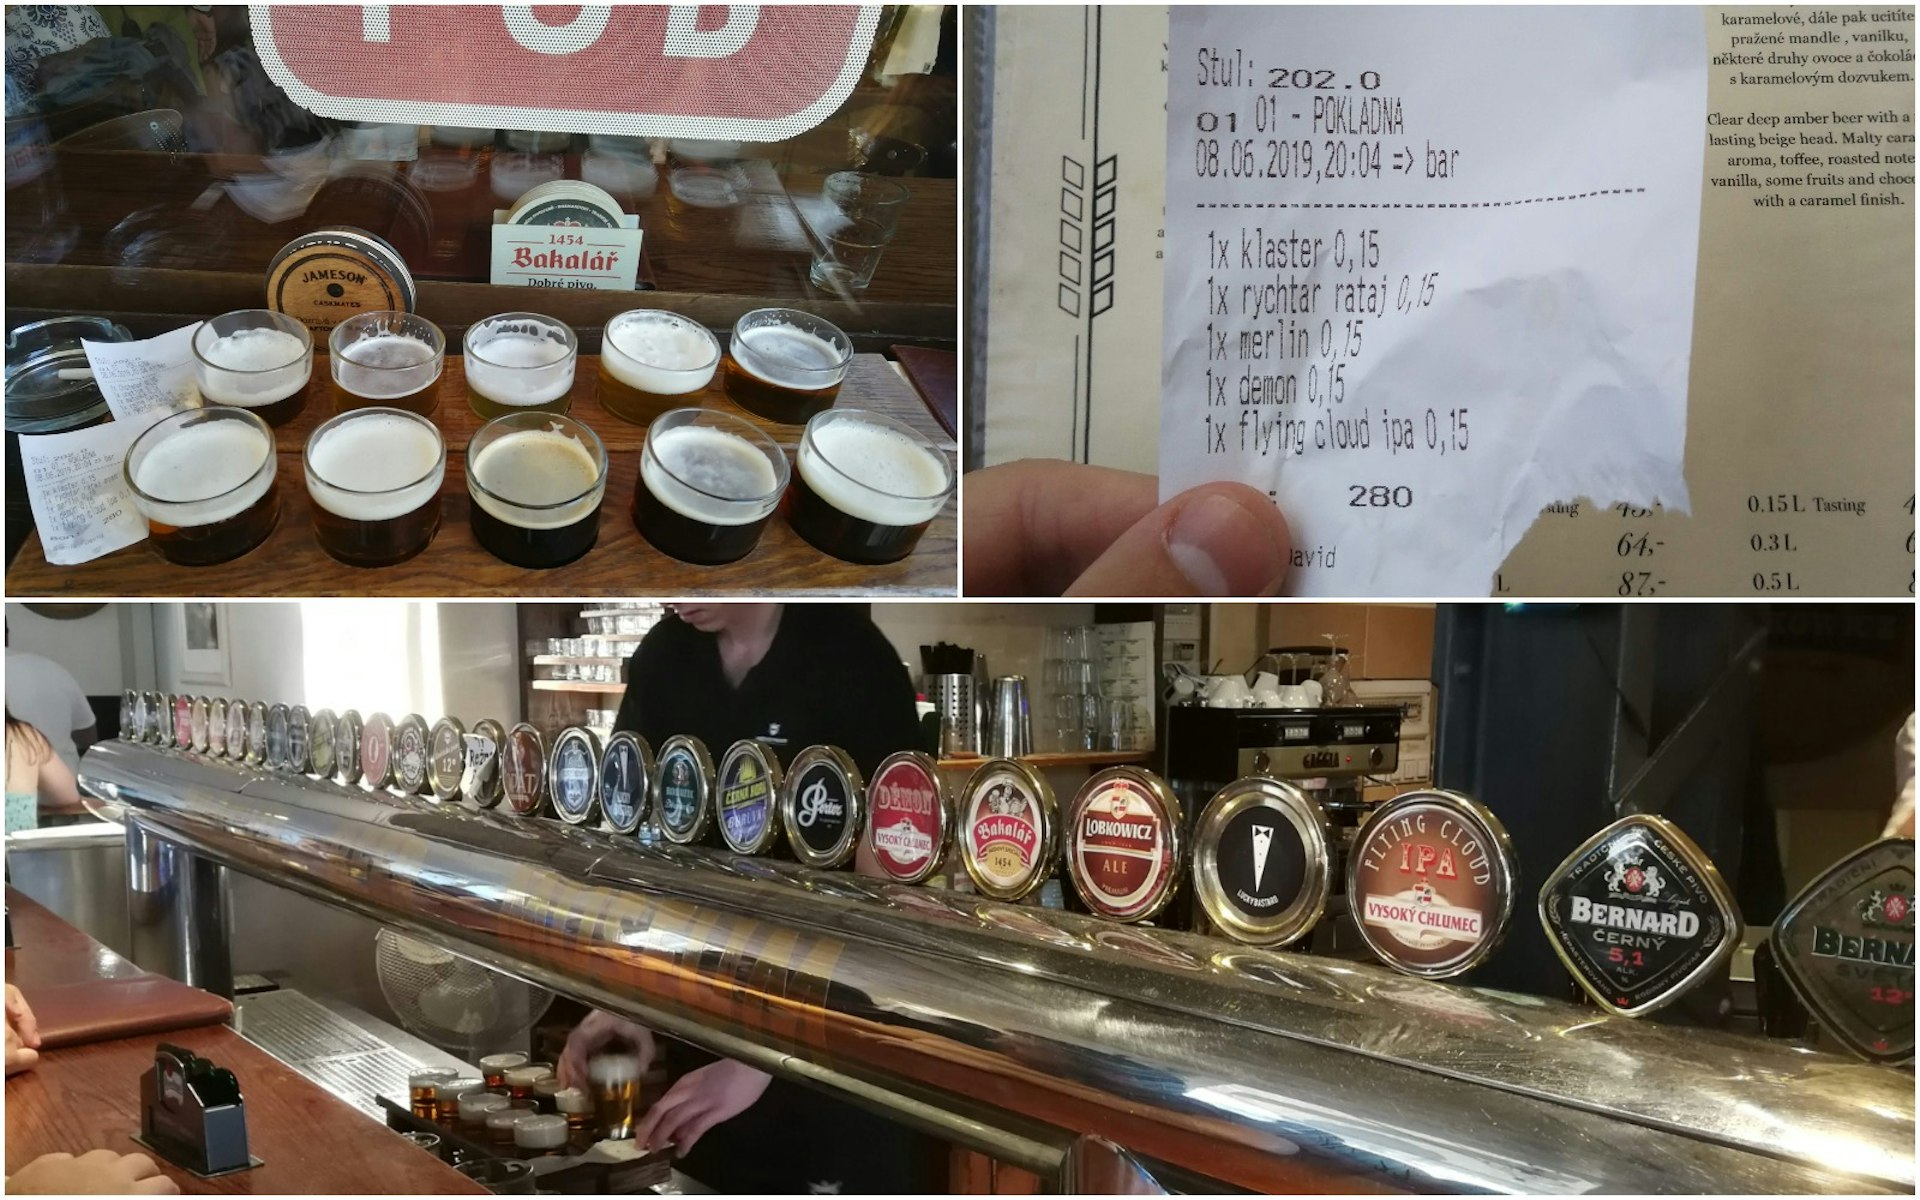 Three images of various bars, beers and a receipt.